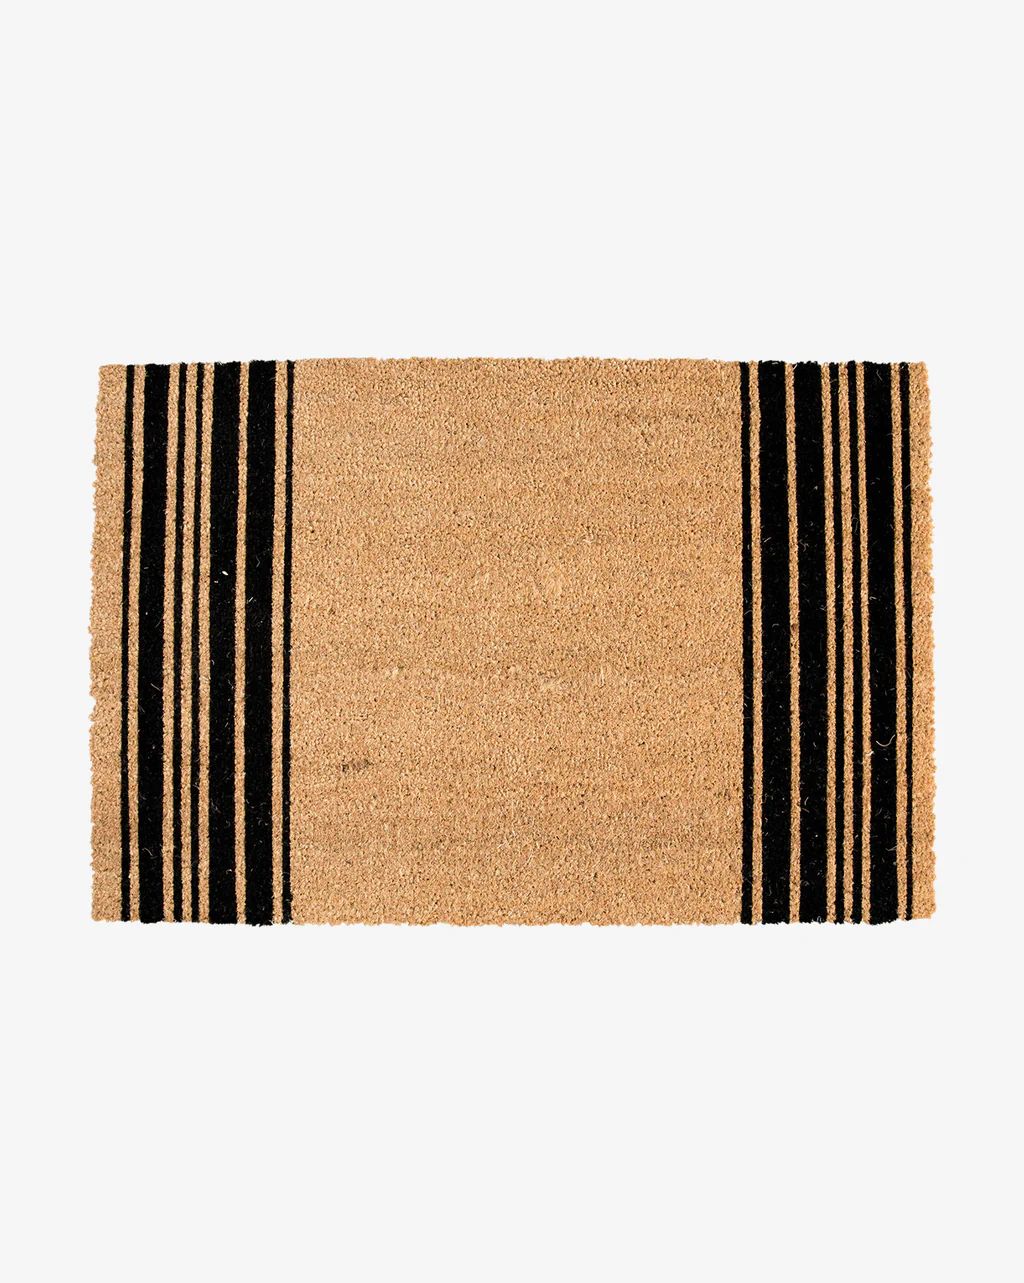 French Stripe Doormat | McGee & Co.